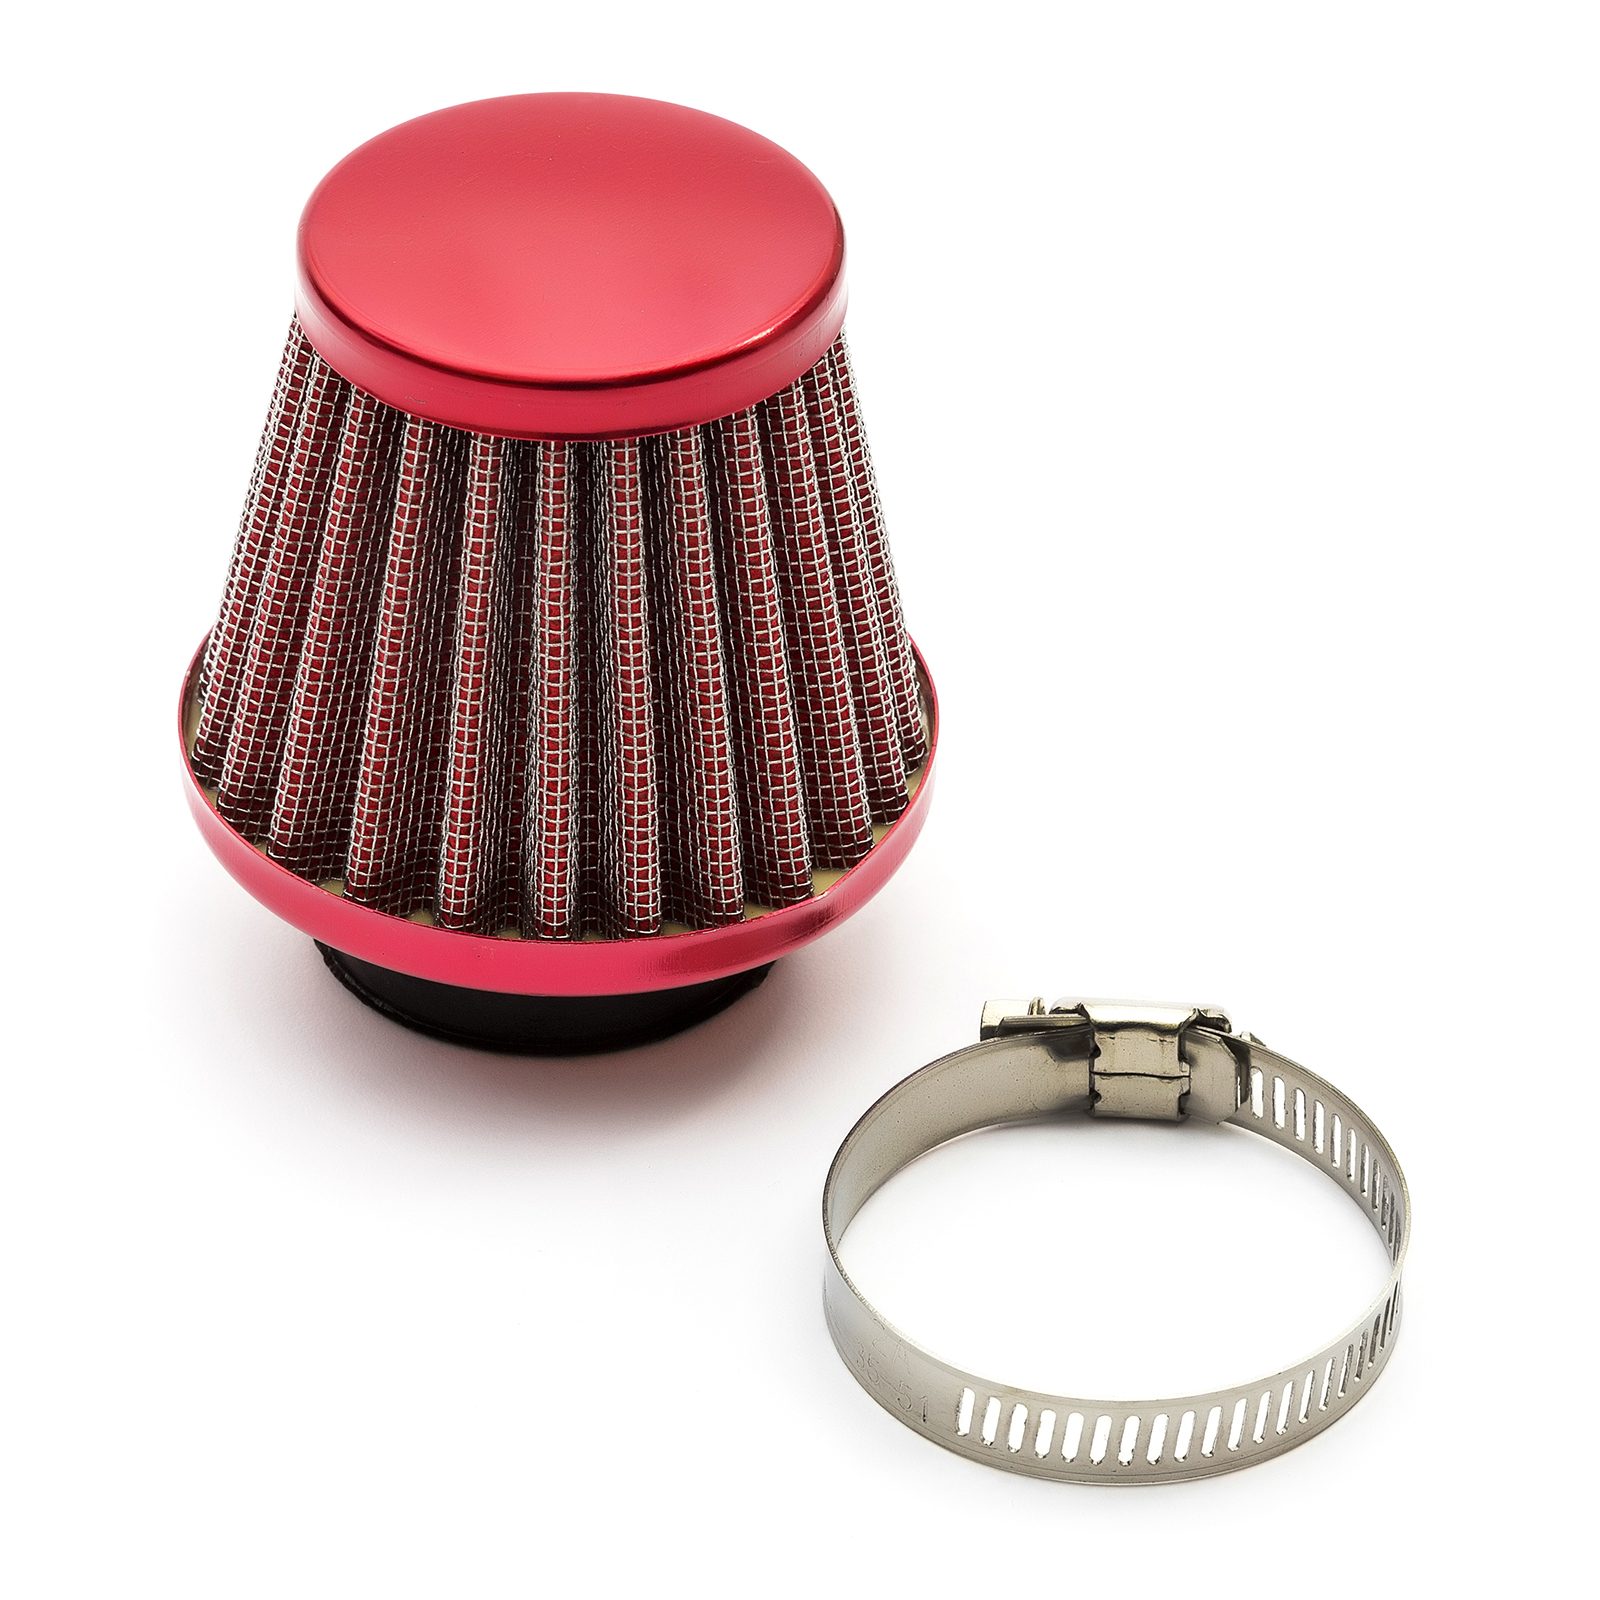 35mm Scooter Air Filter Red Performance Mushroom Style Straight Neck